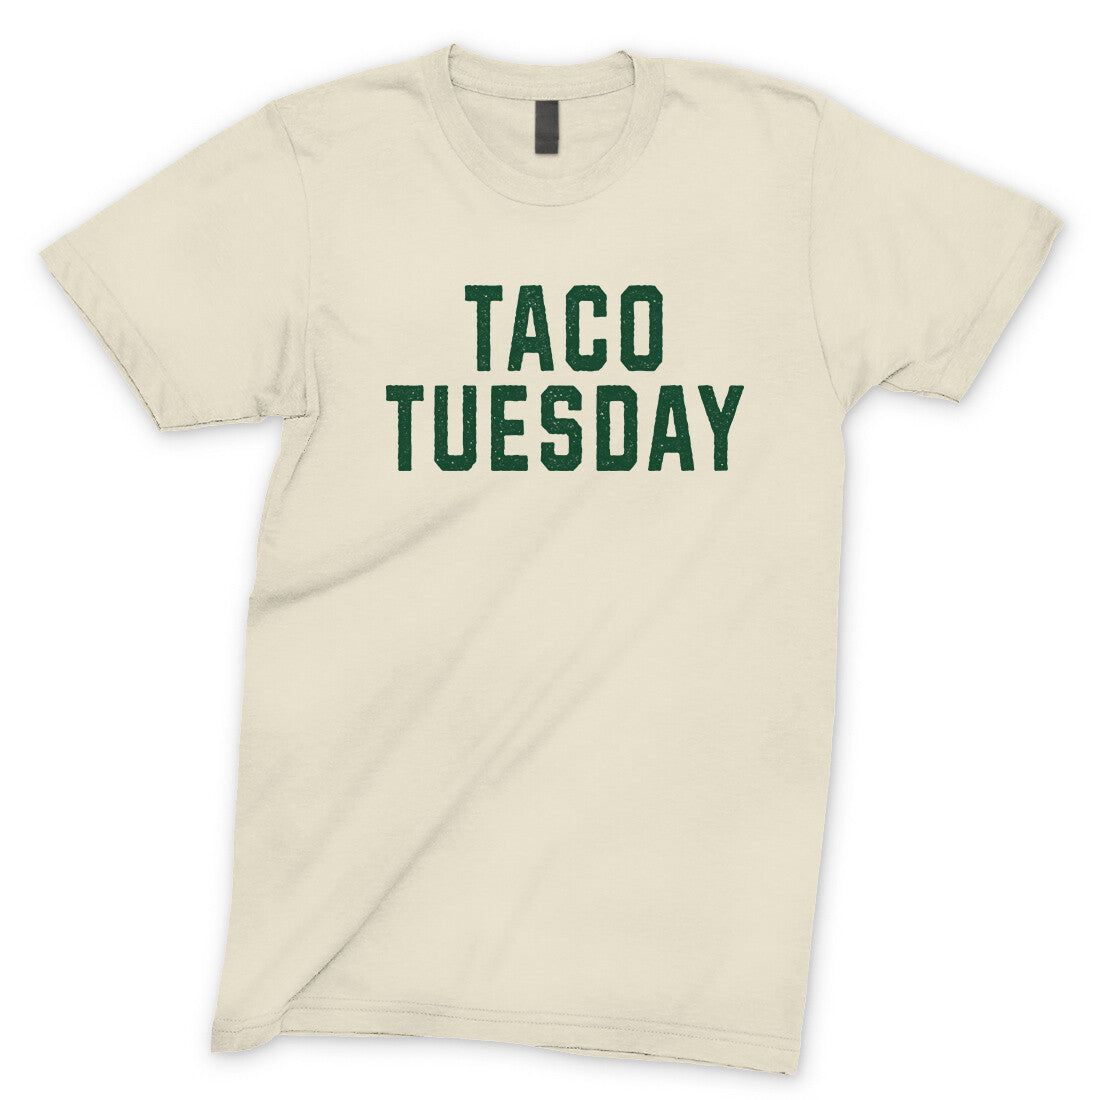 Taco Tuesday in Natural Color